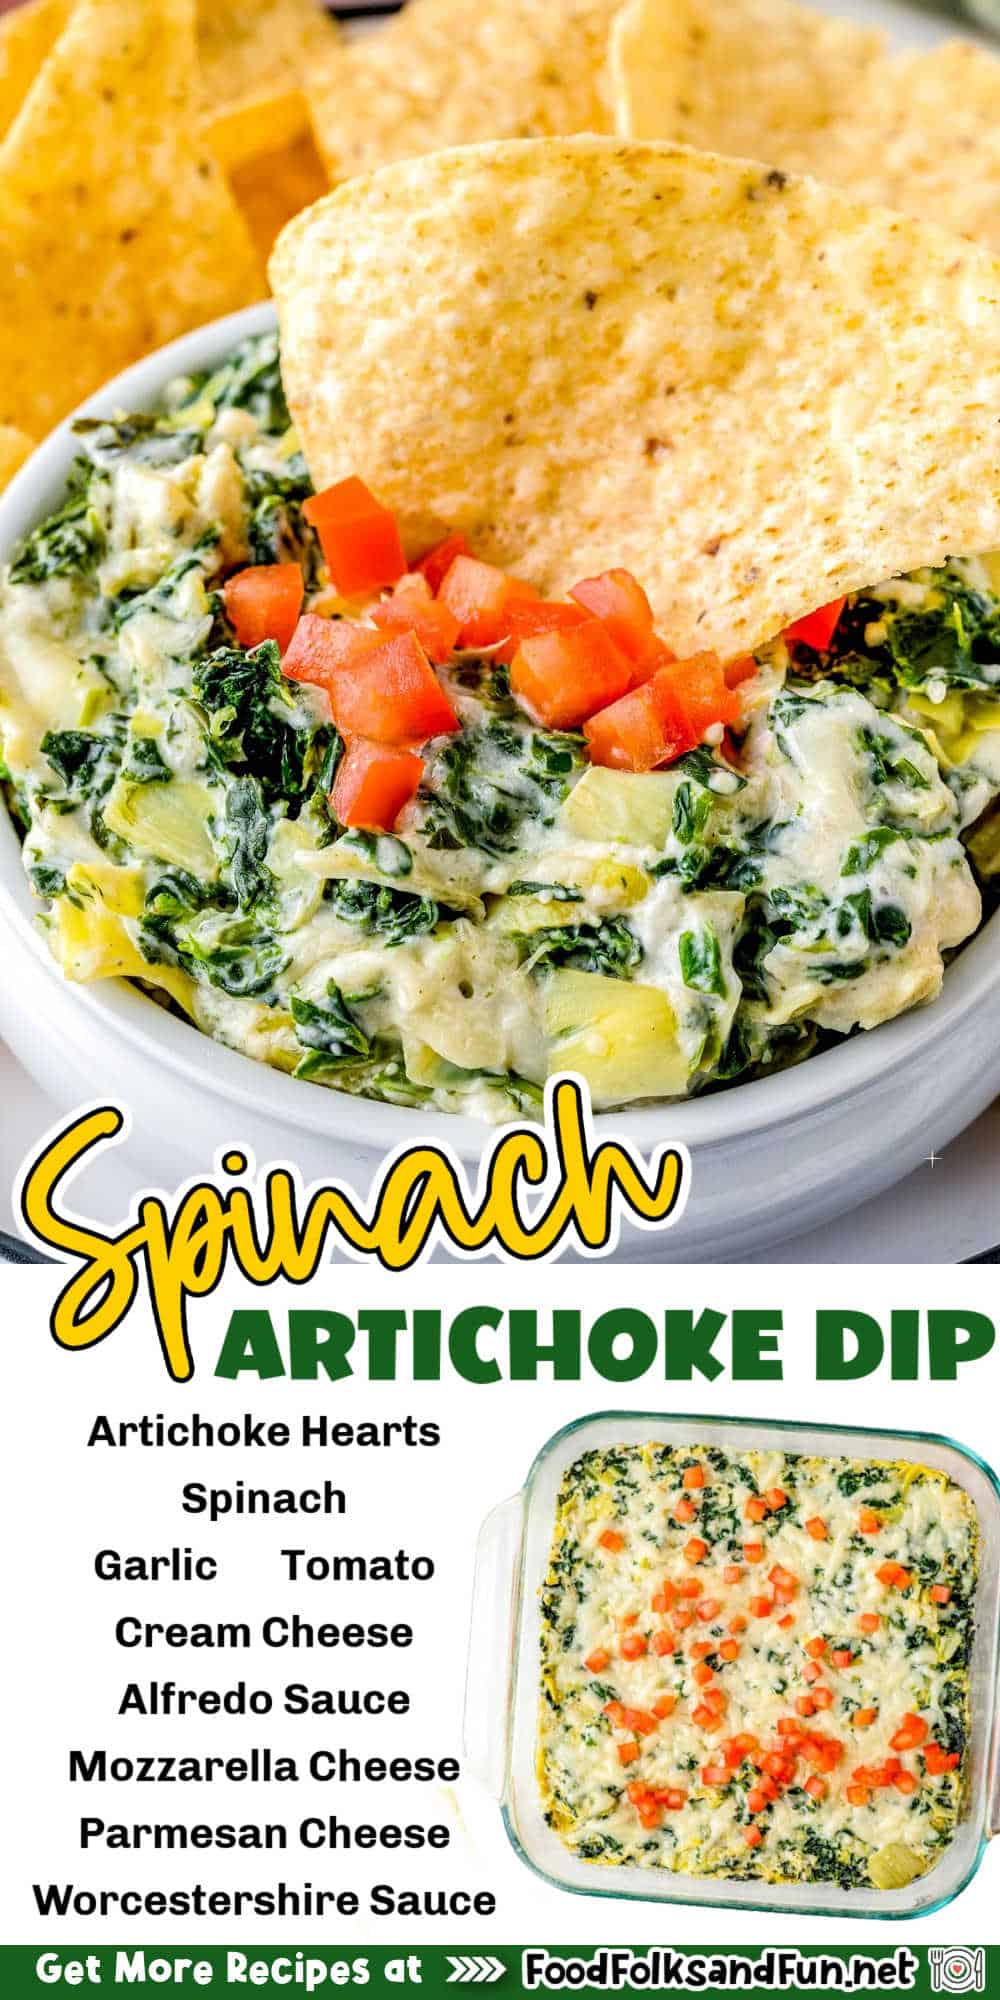 My Spinach Artichoke Dip recipe is always a hit at parties. It's easy to make, delicious, and made without mayo! Come find out my secret ingredient that doubles as a recipe shortcut! via @foodfolksandfun